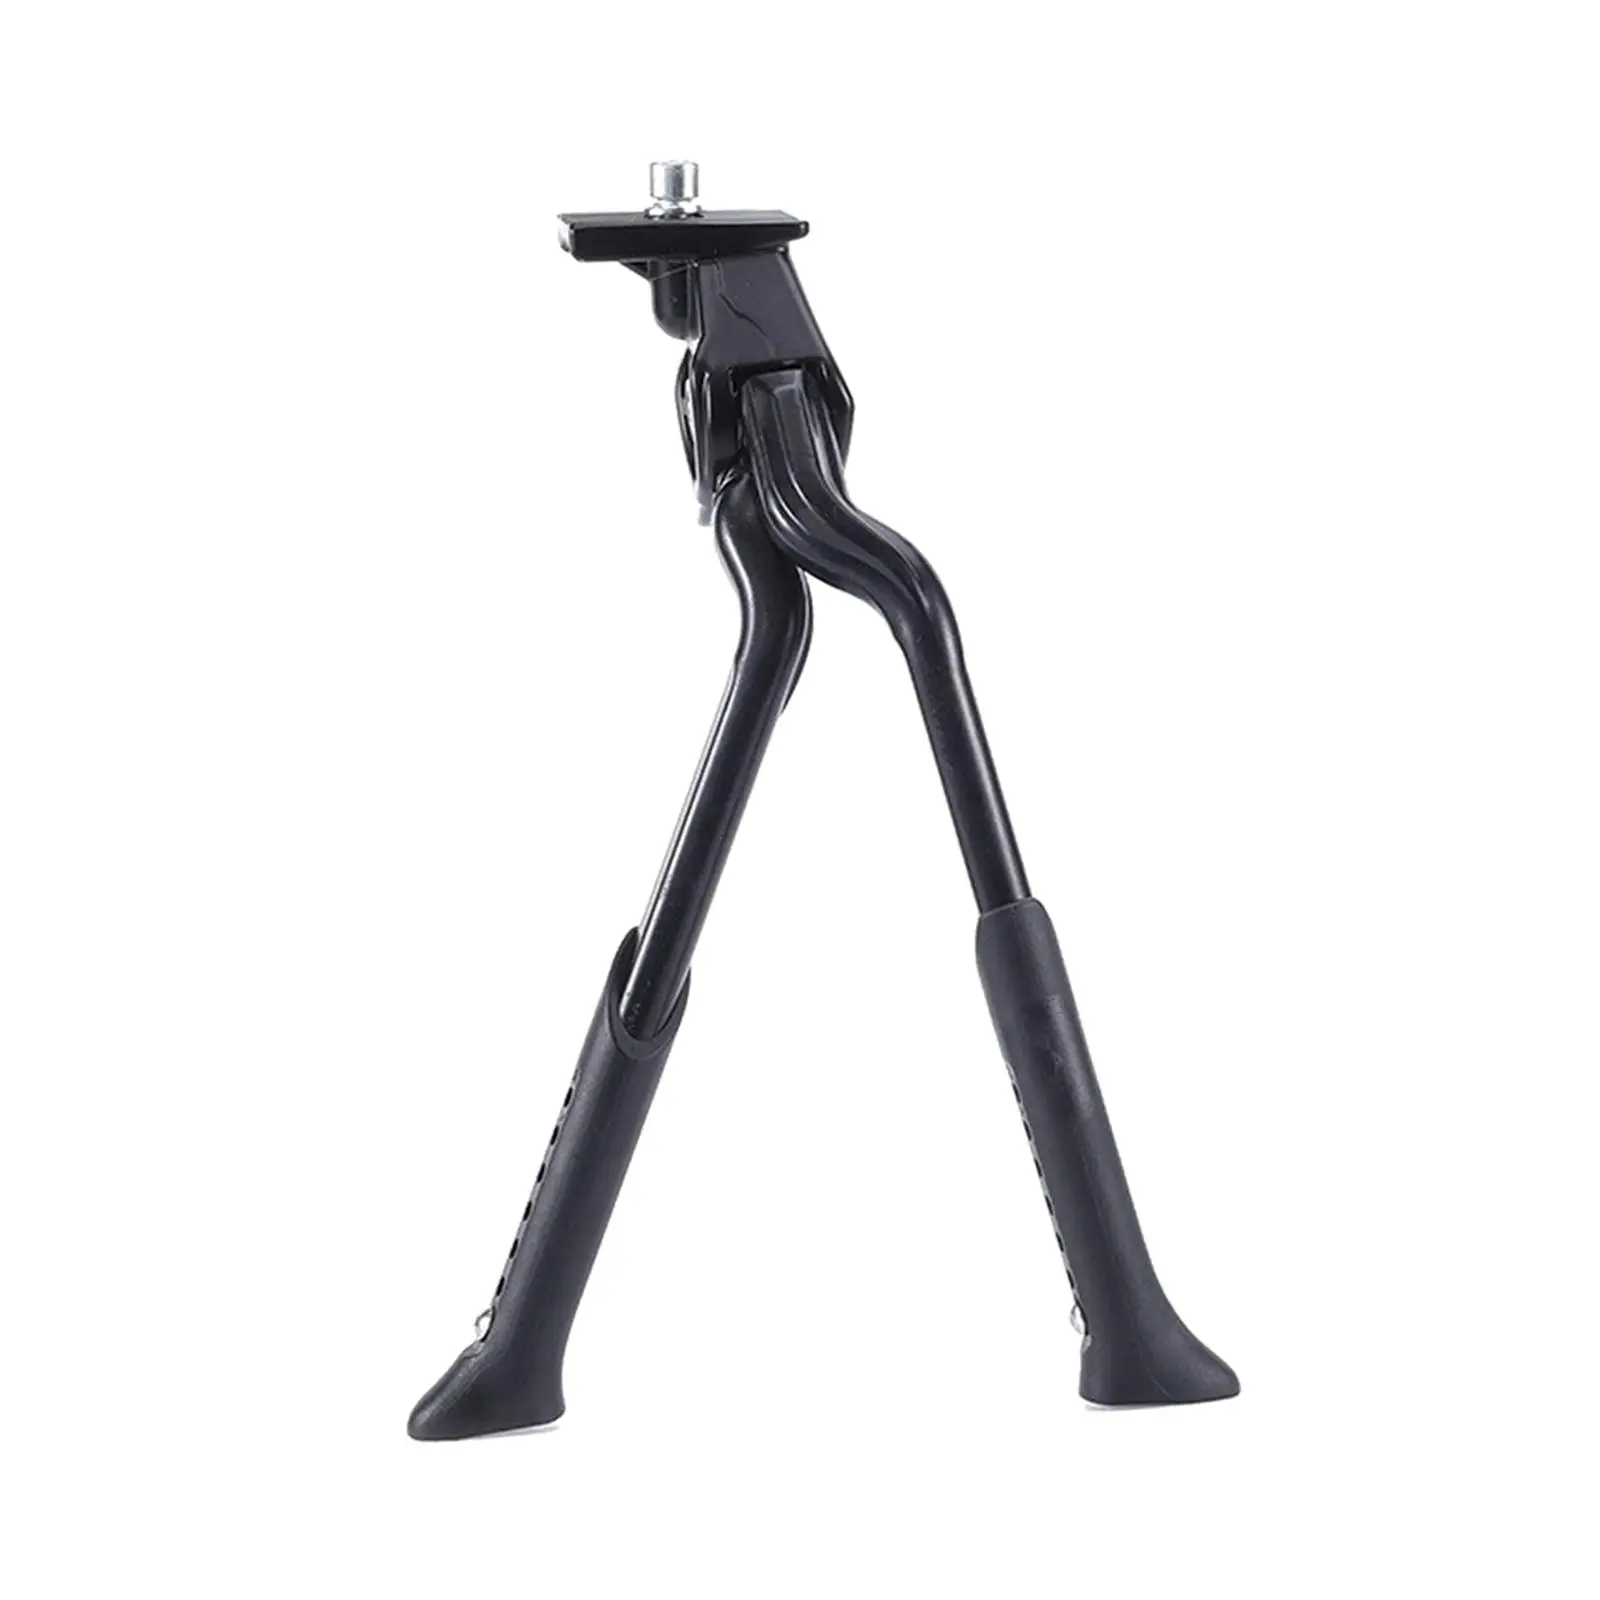 Double Leg Bike Kickstand Dual Leg Bicycle Stand Aluminum Alloy Non Slip Footrest Bicycle Cycling Parking Side Stand